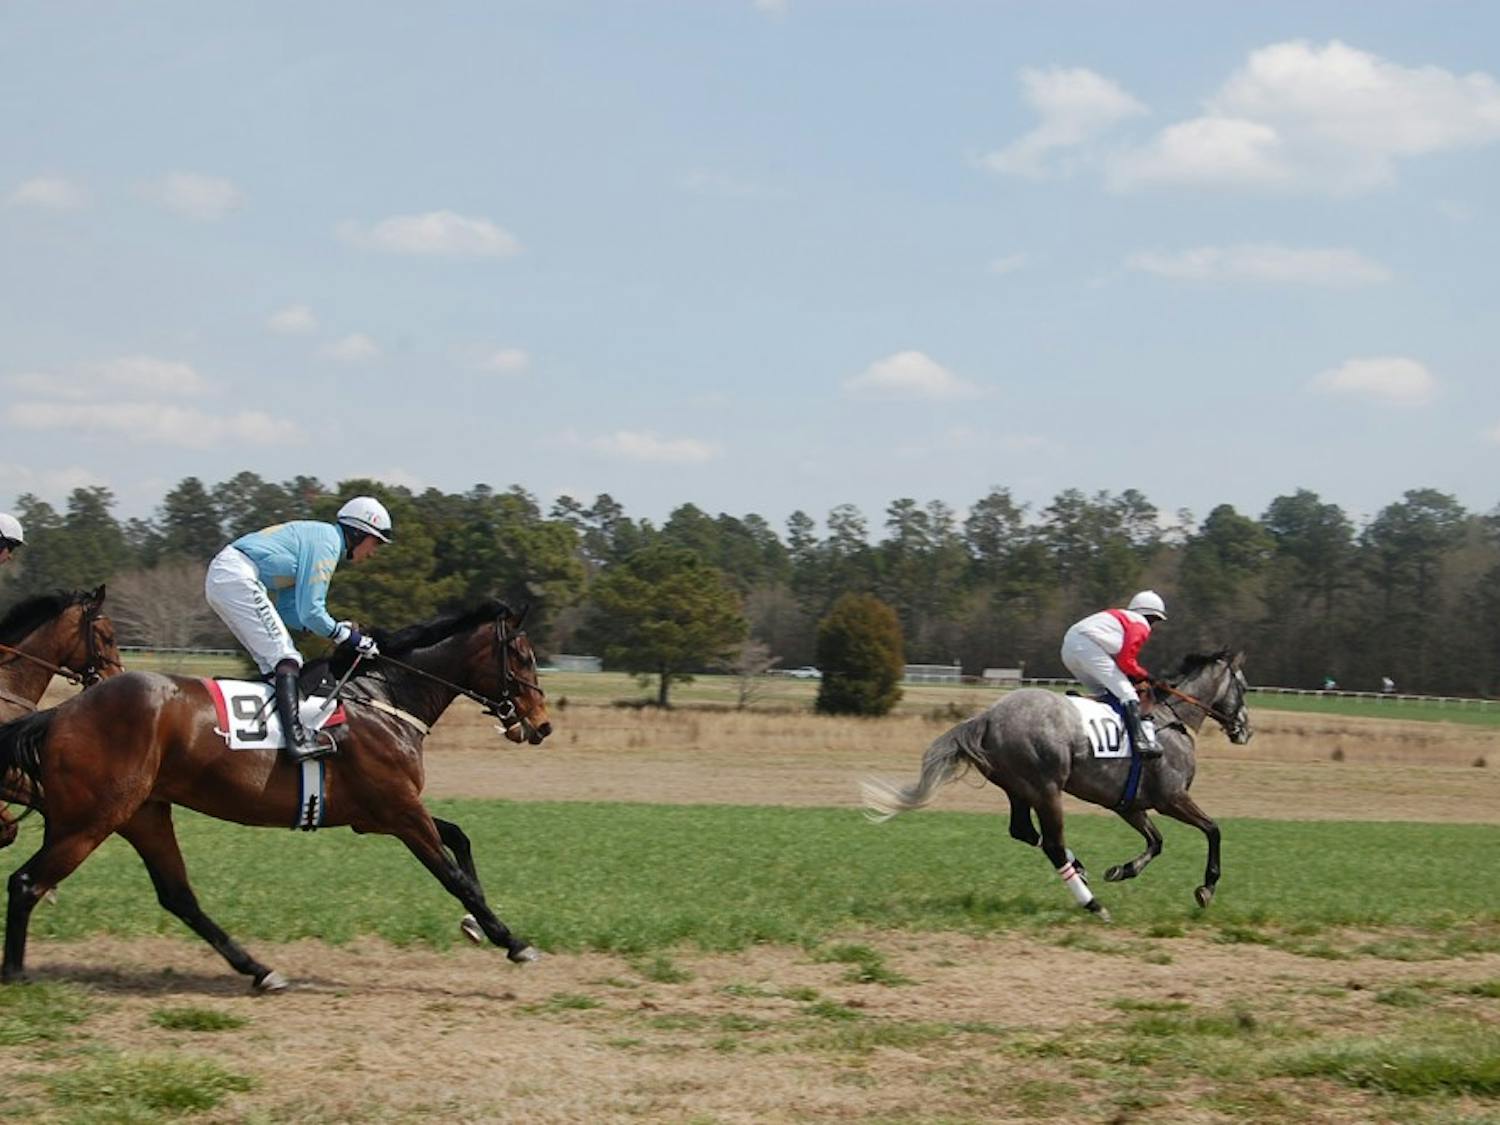 	Six horse races took place at Carolina Cup in Camden Saturday. Ross Geraghty rode Alajmal, a 5-year-old gelding, to win the eponymous 2 1/8 mile race.